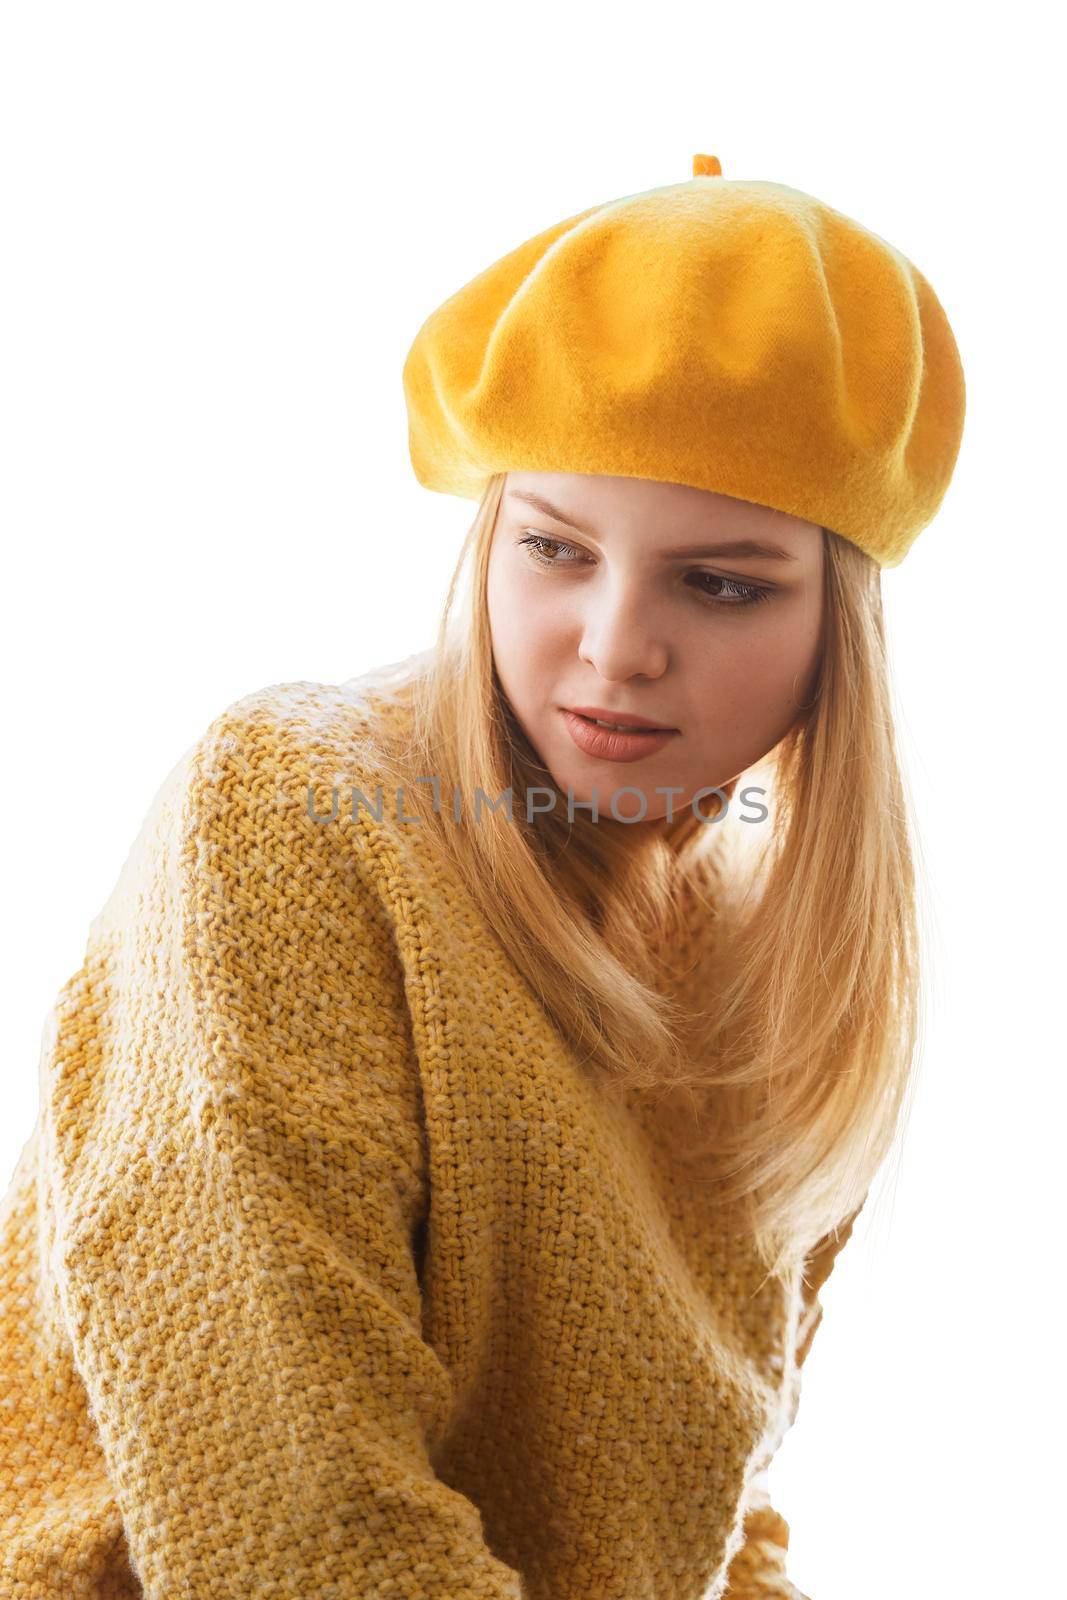 portrait of a young woman in a yellow beret, isolate on a white by Lena_Ogurtsova